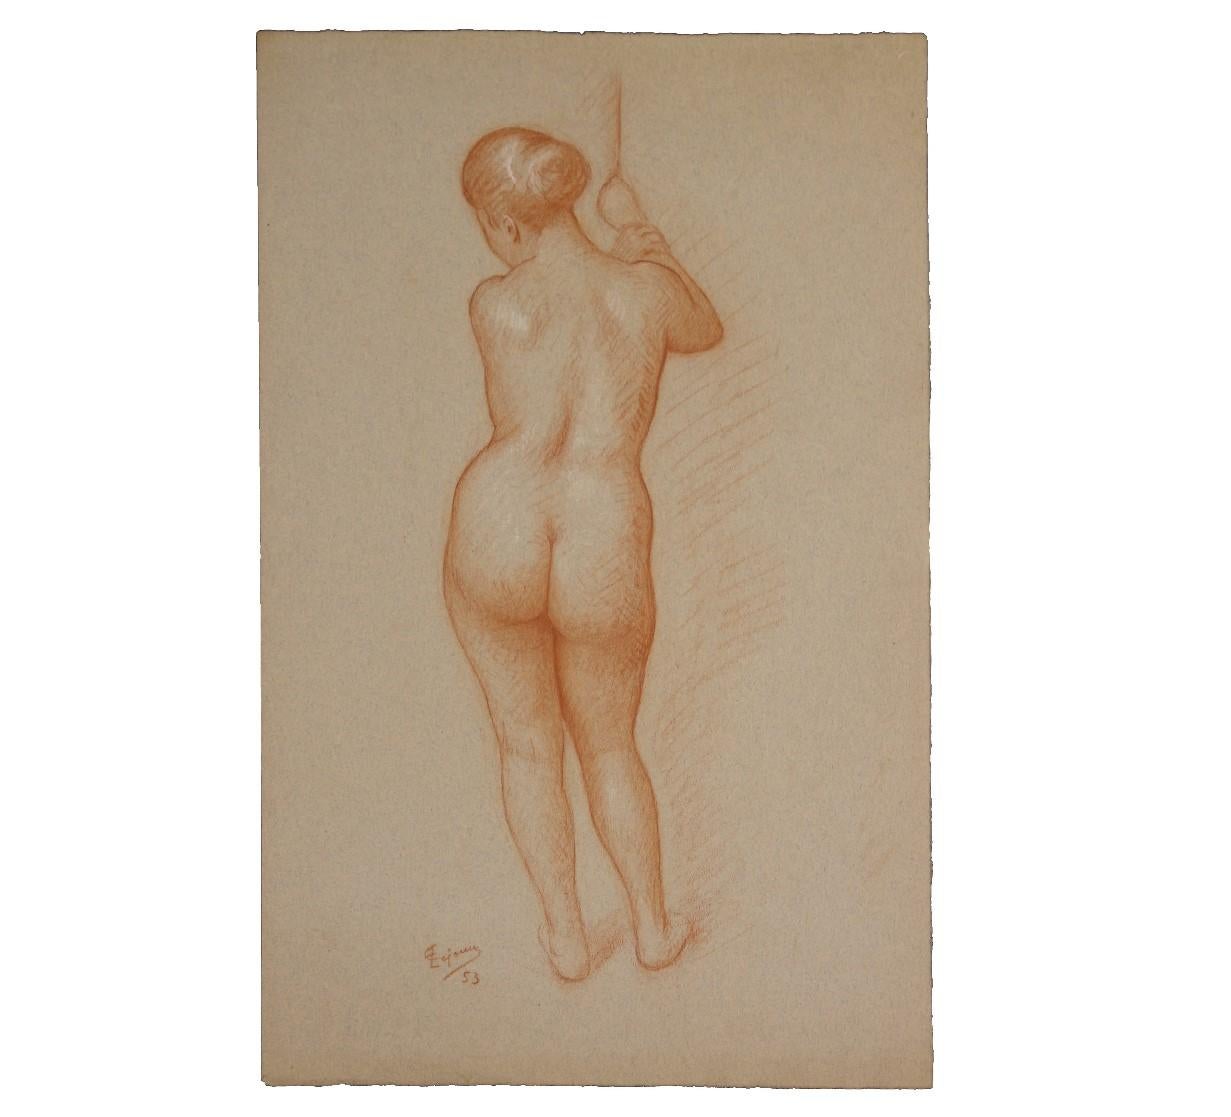 Naturalistic Study of a Standing Nude Woman - Art by Emile Lejeune